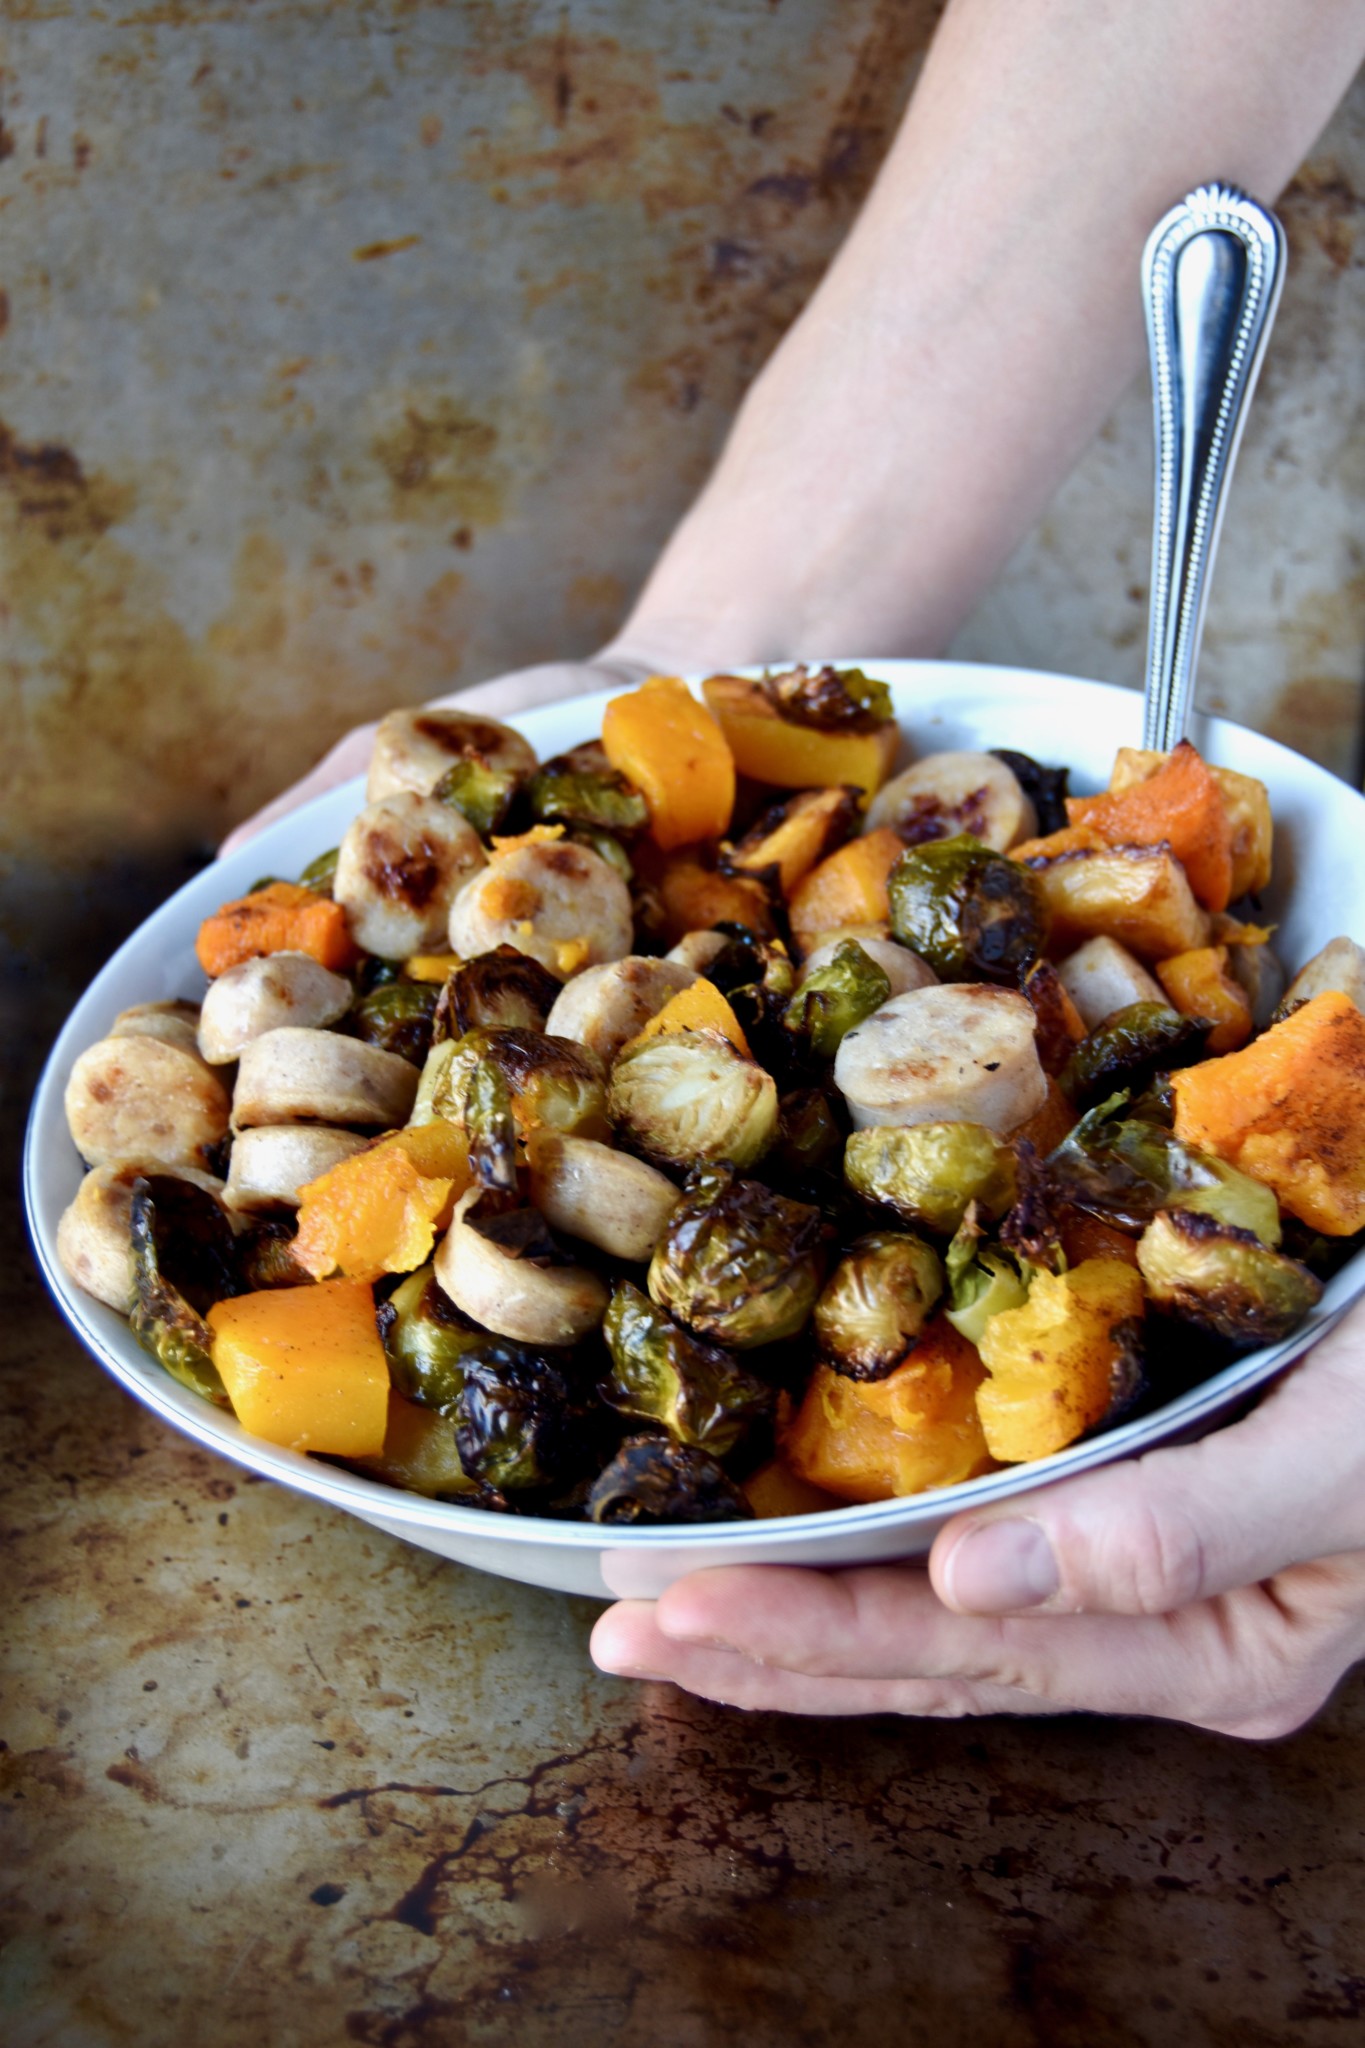 harvest roasted root vegetables and chicken apple sausage - a fully roasted dinner packed with veggies and protein // cait's plate